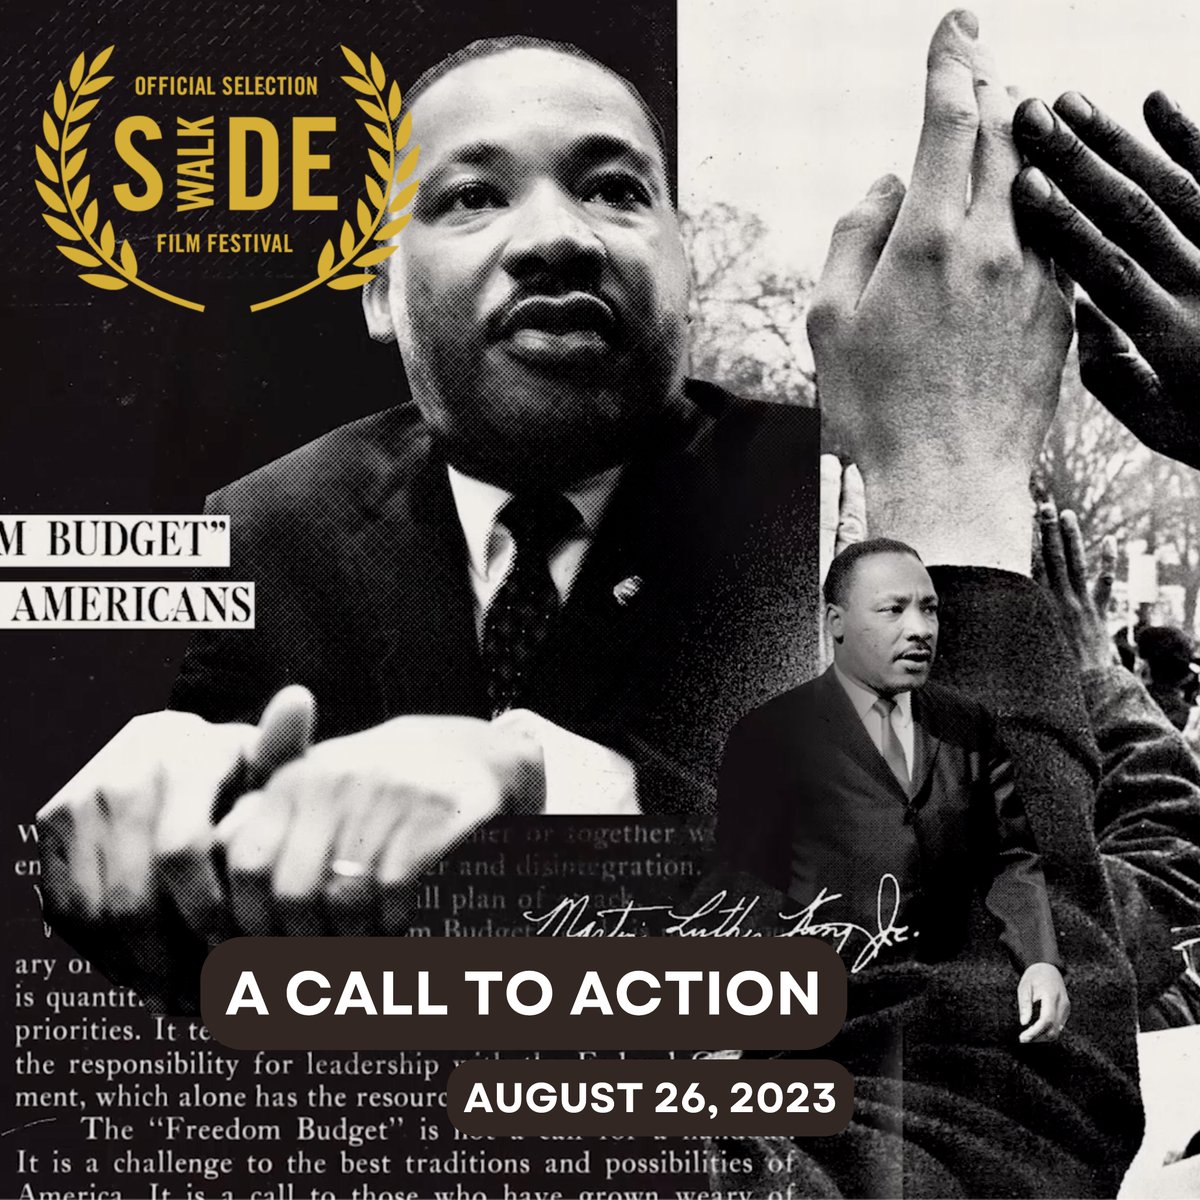 Join us this August 26! We are celebrating the Alabama premiere of A CALL TO ACTION: THE FREEDOM BUDGET OF 1966, dir. by Jenny Alexander. 🎥The 25th annual Sidewalk Film Festival will take place August 21-27 In downtown Birmingham’s historic theatre district 🎟@sidewalkfilm